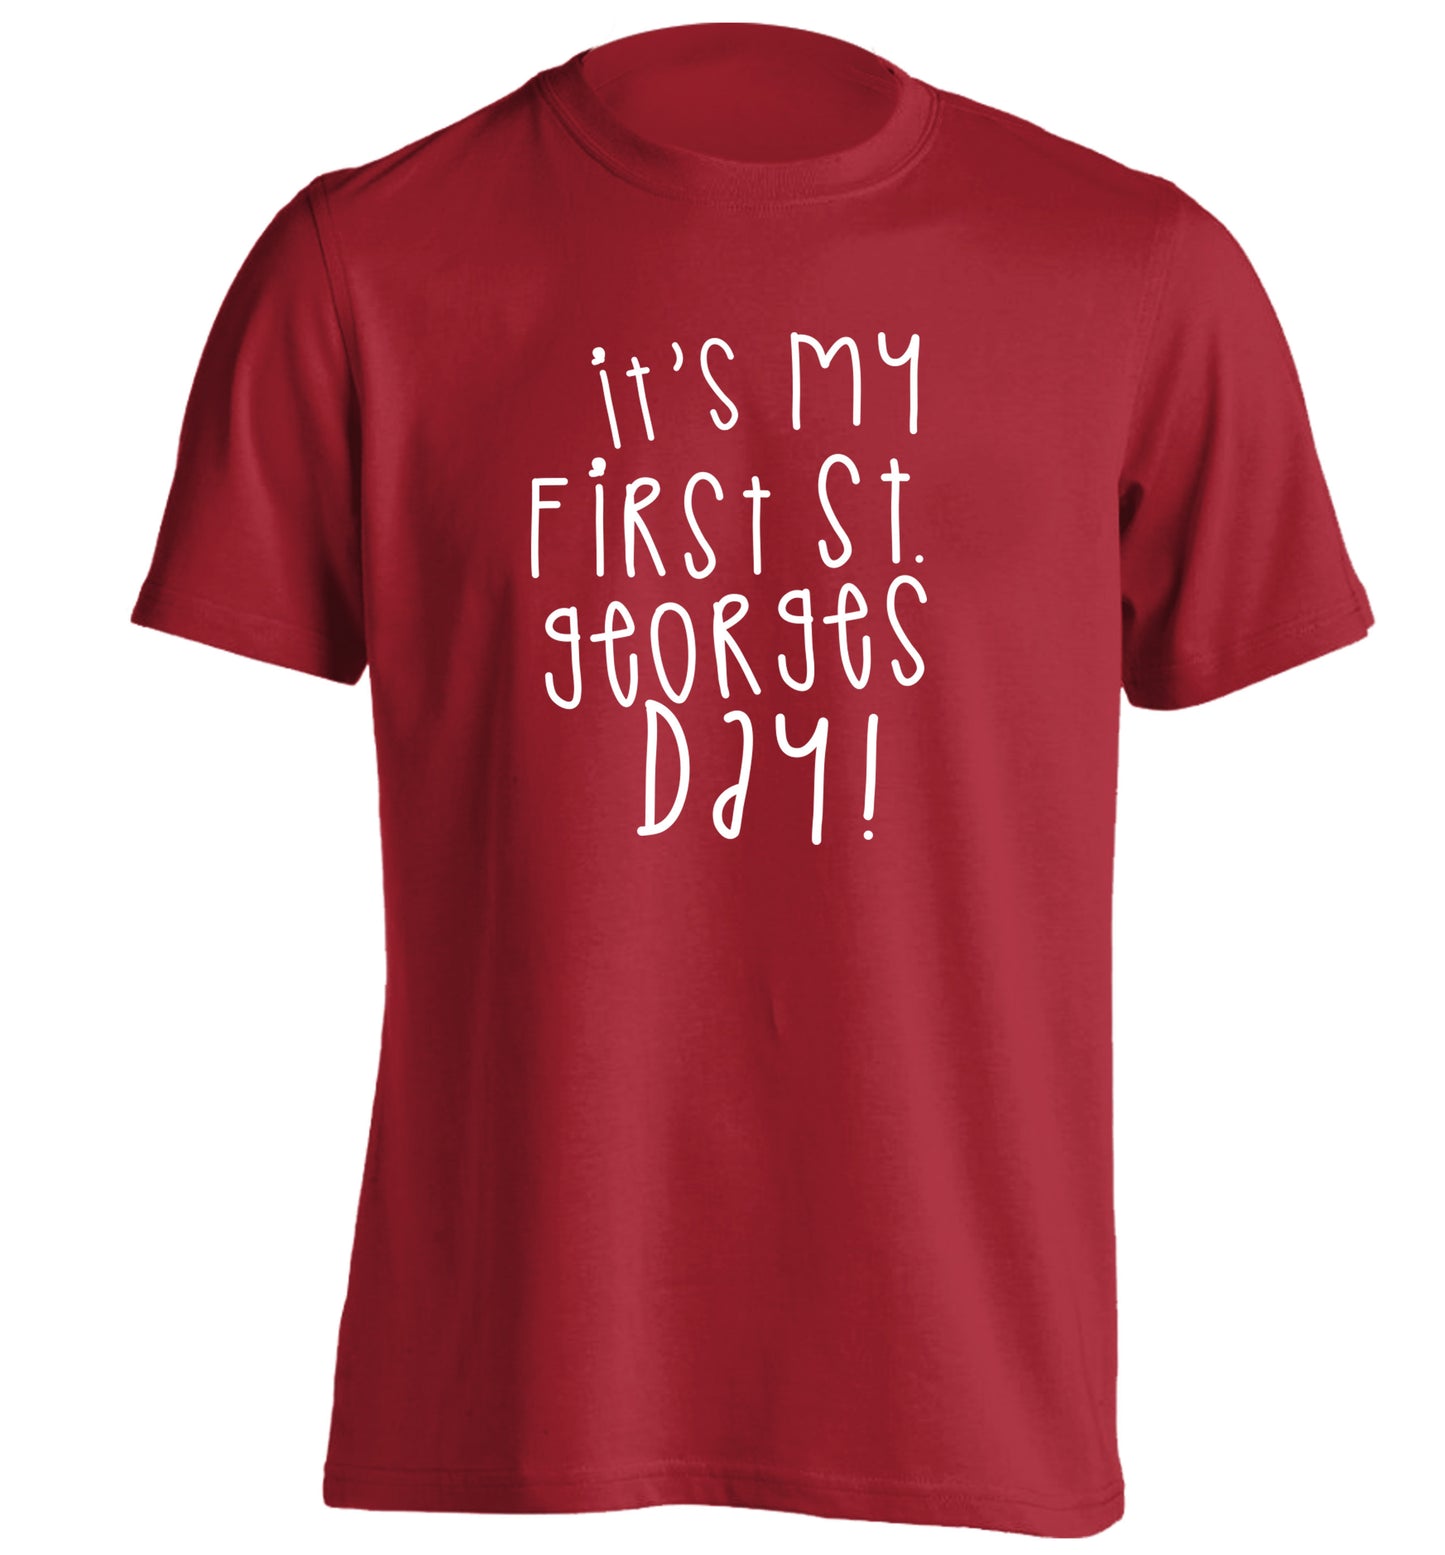 It's my first St Georges day adults unisex red Tshirt 2XL